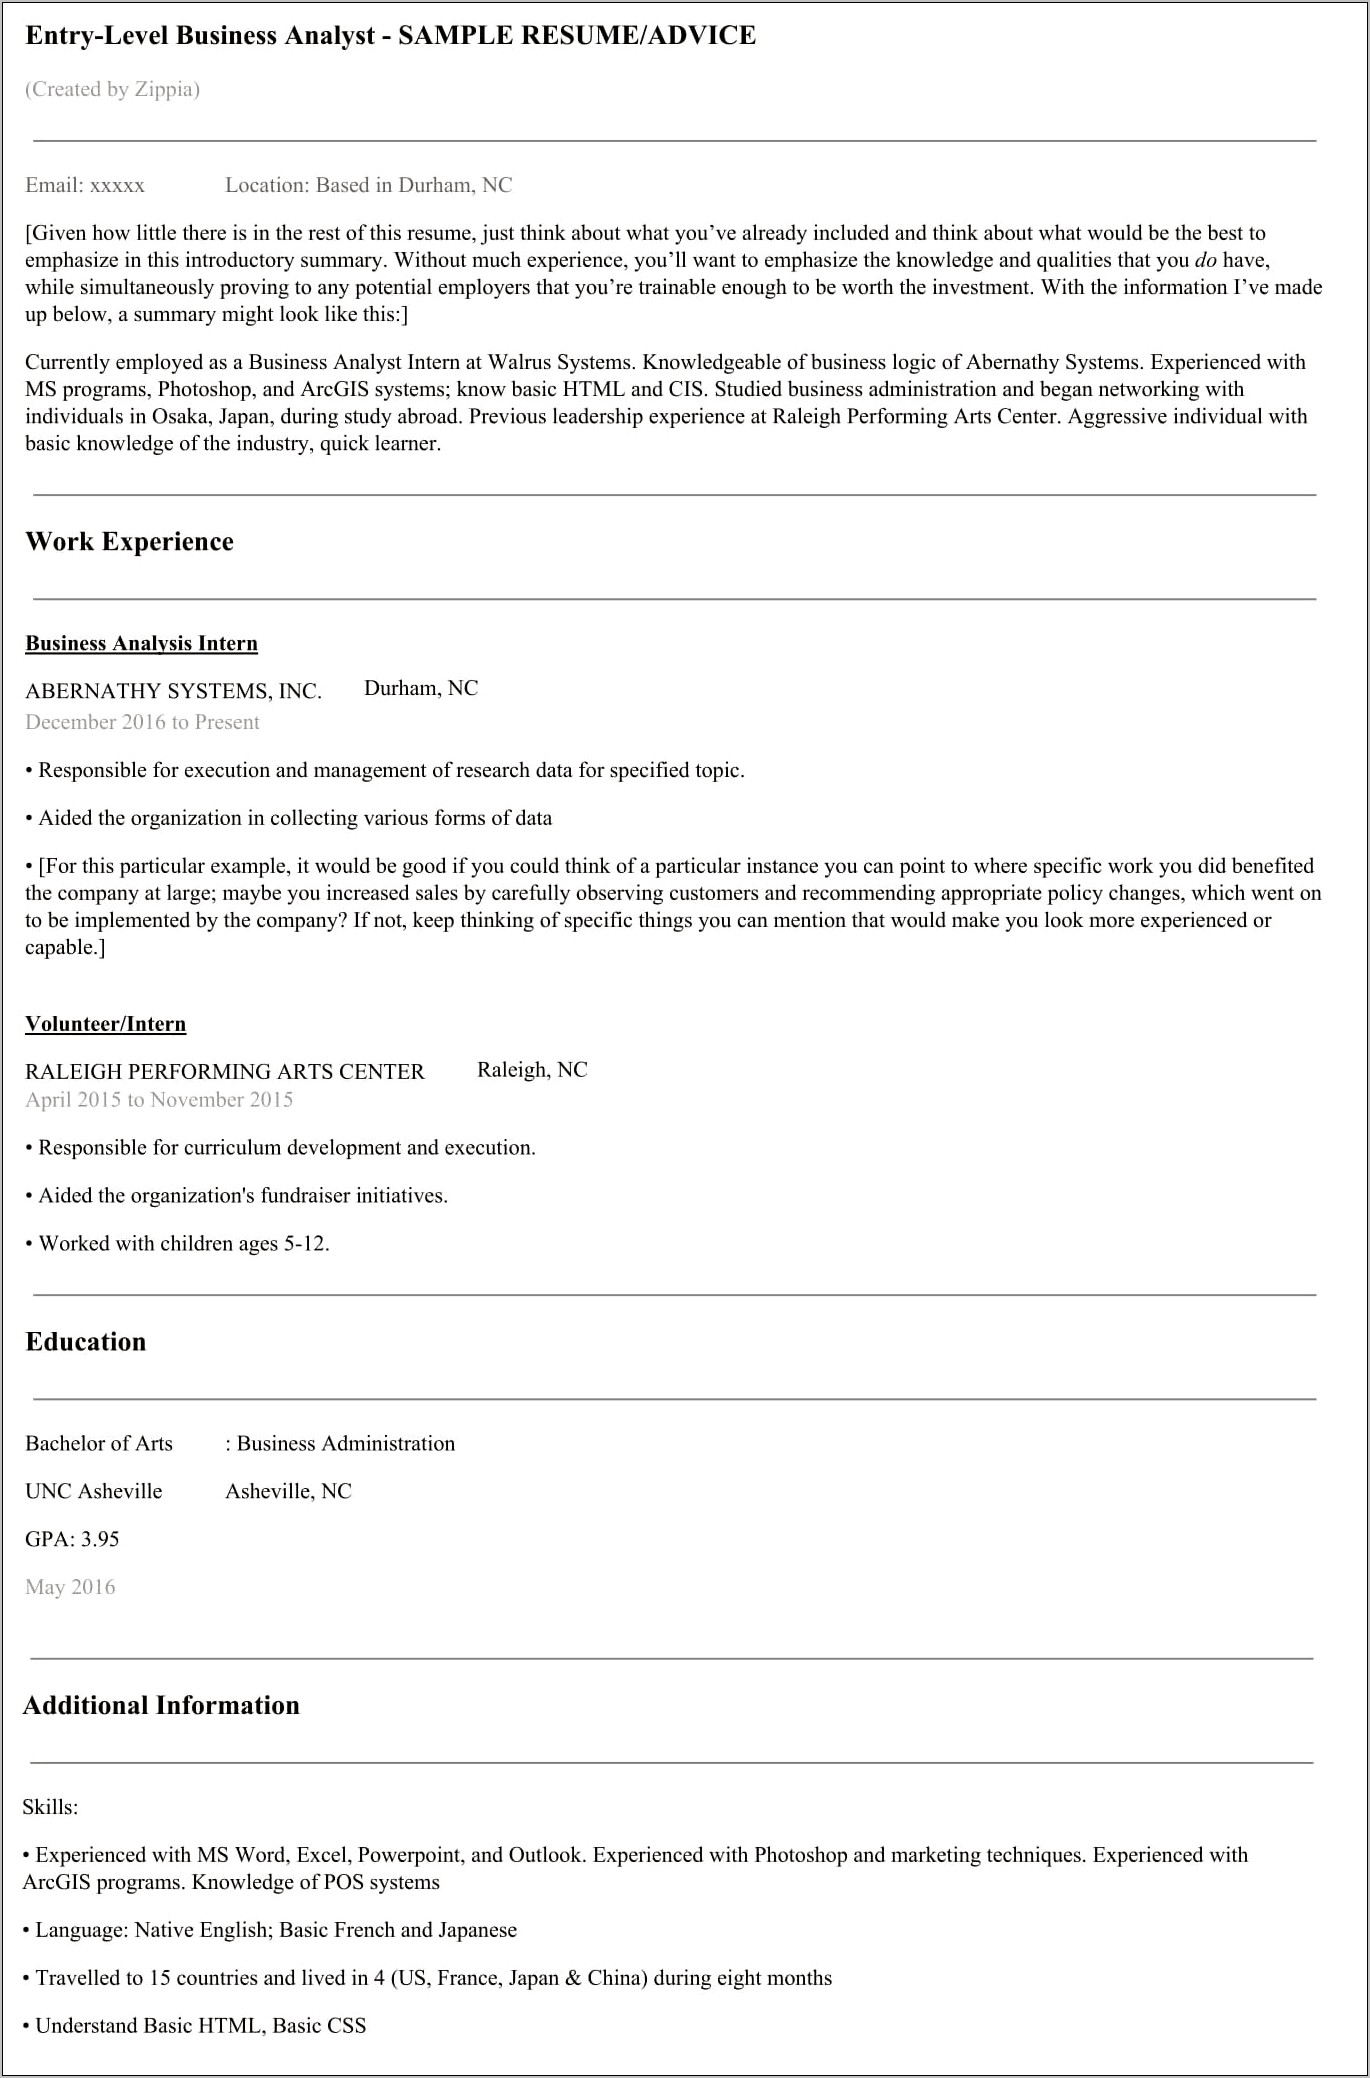 Resume Summary Samples For Business Analyst